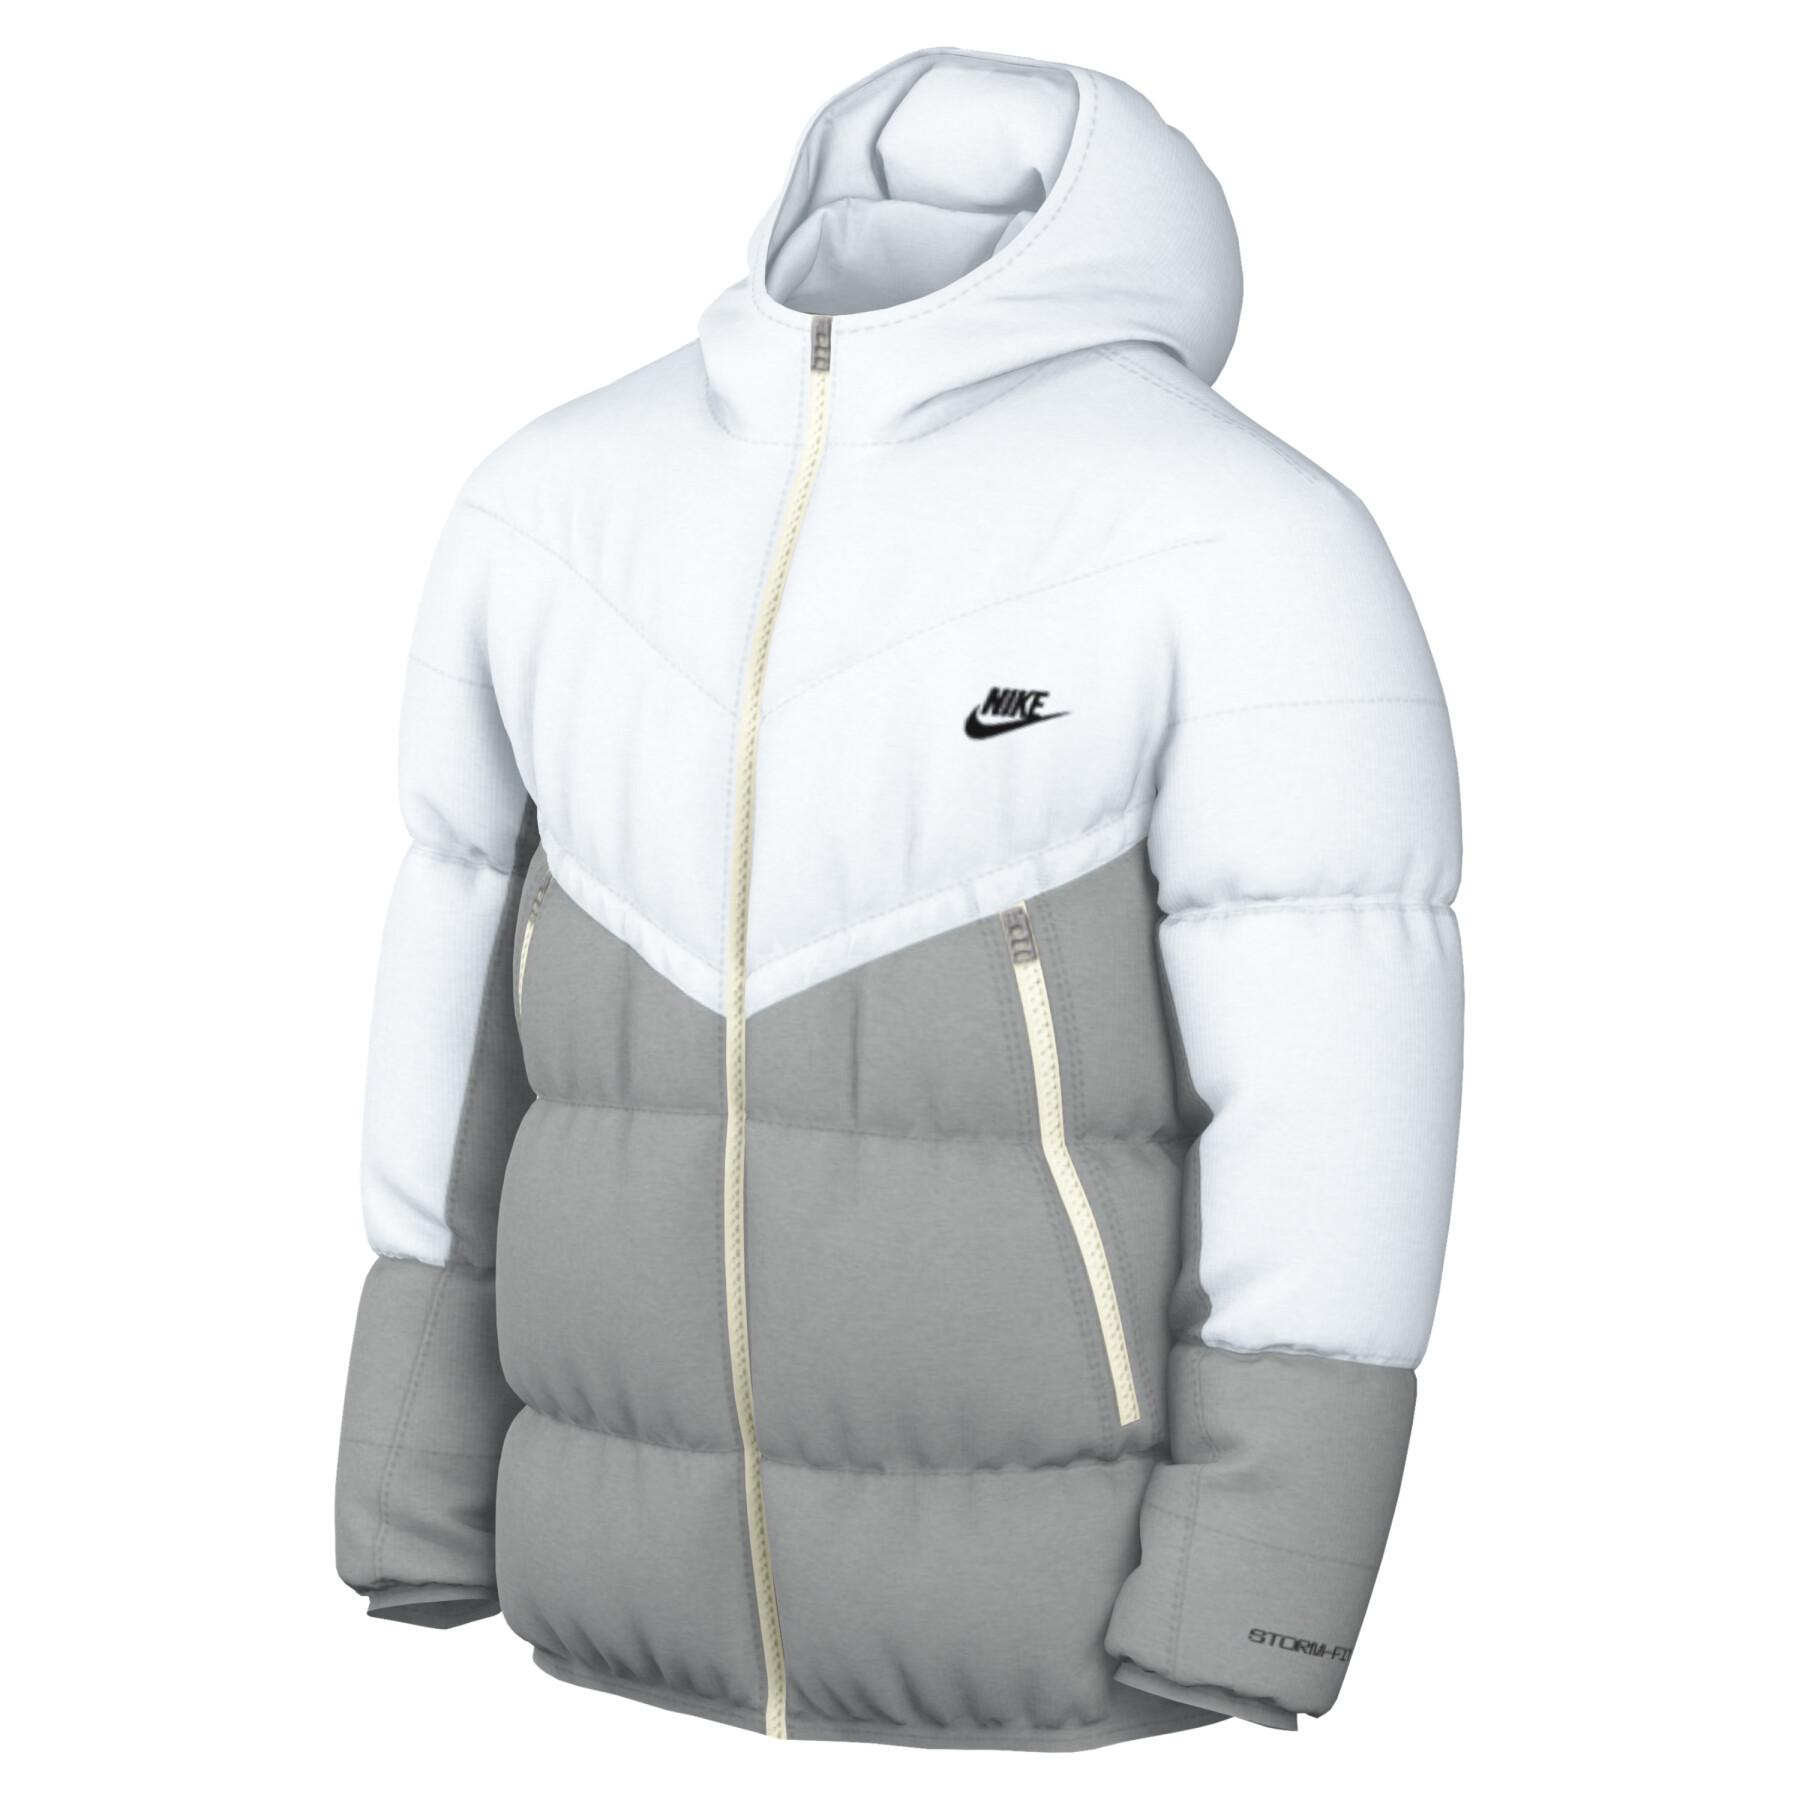 Chaqueta con capucha Nike Storm-FIT Windrunner Pl-Fld